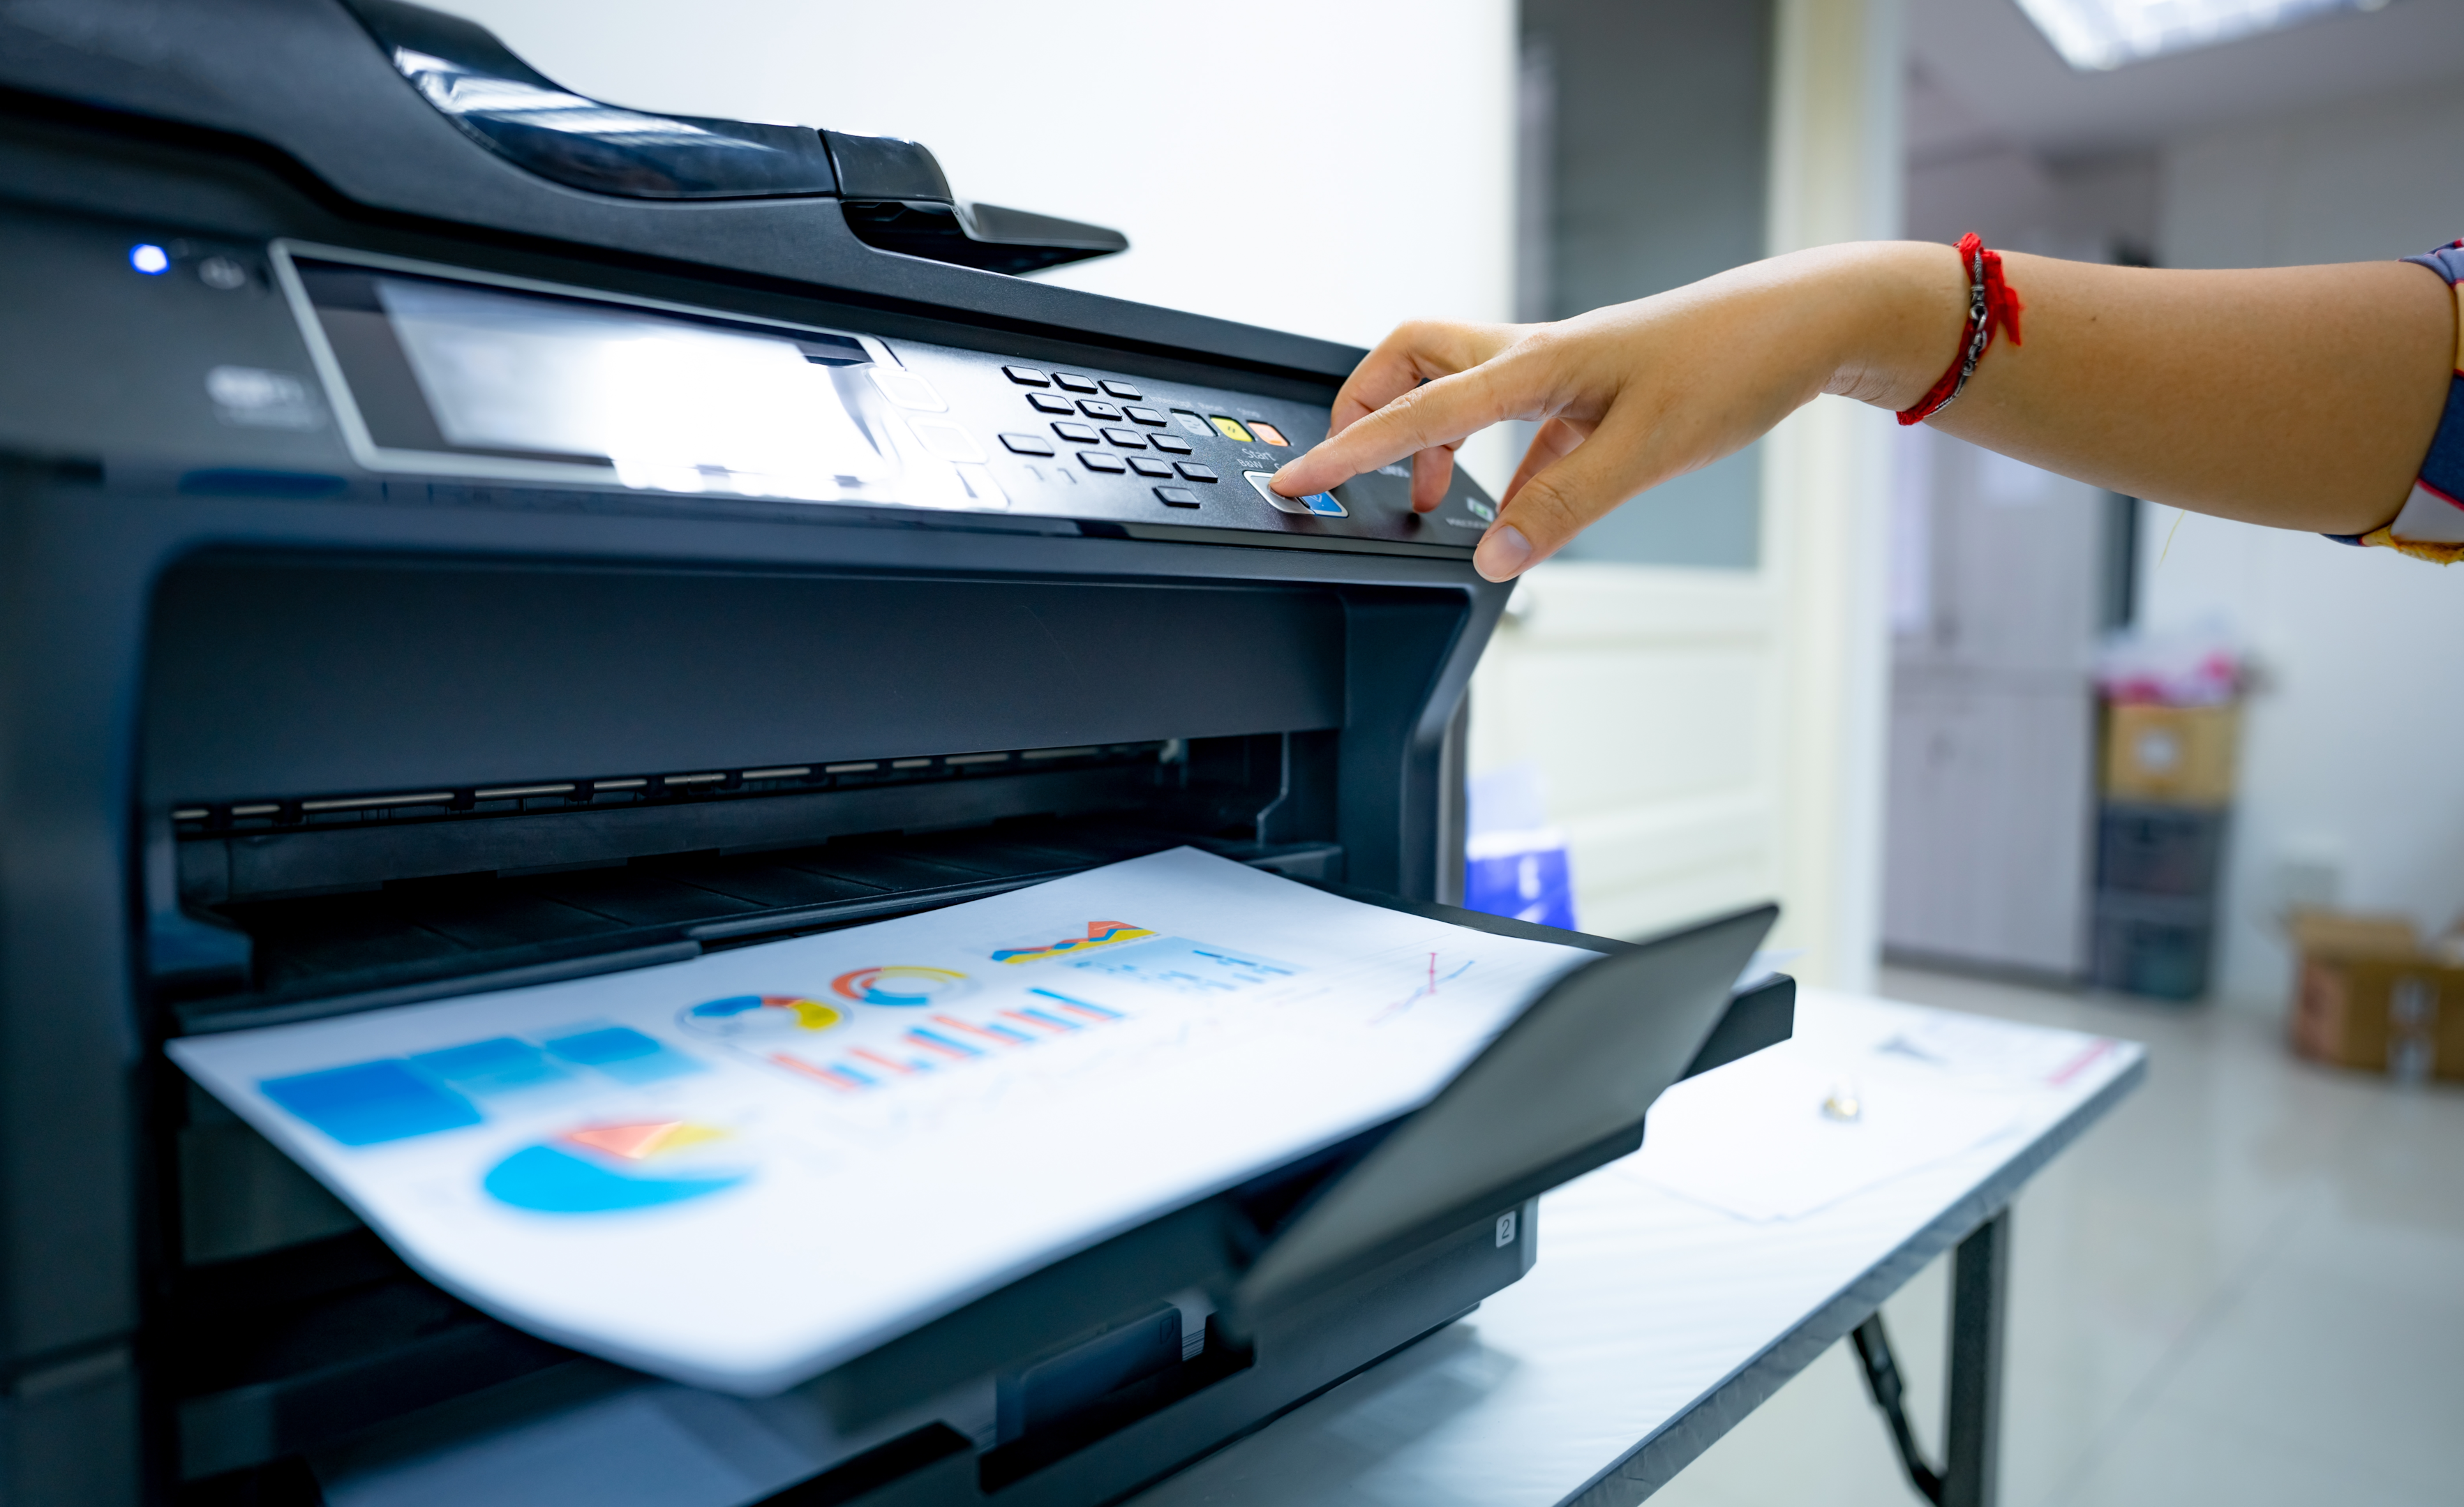 Which is the best a3 printer scanner copier for my business?